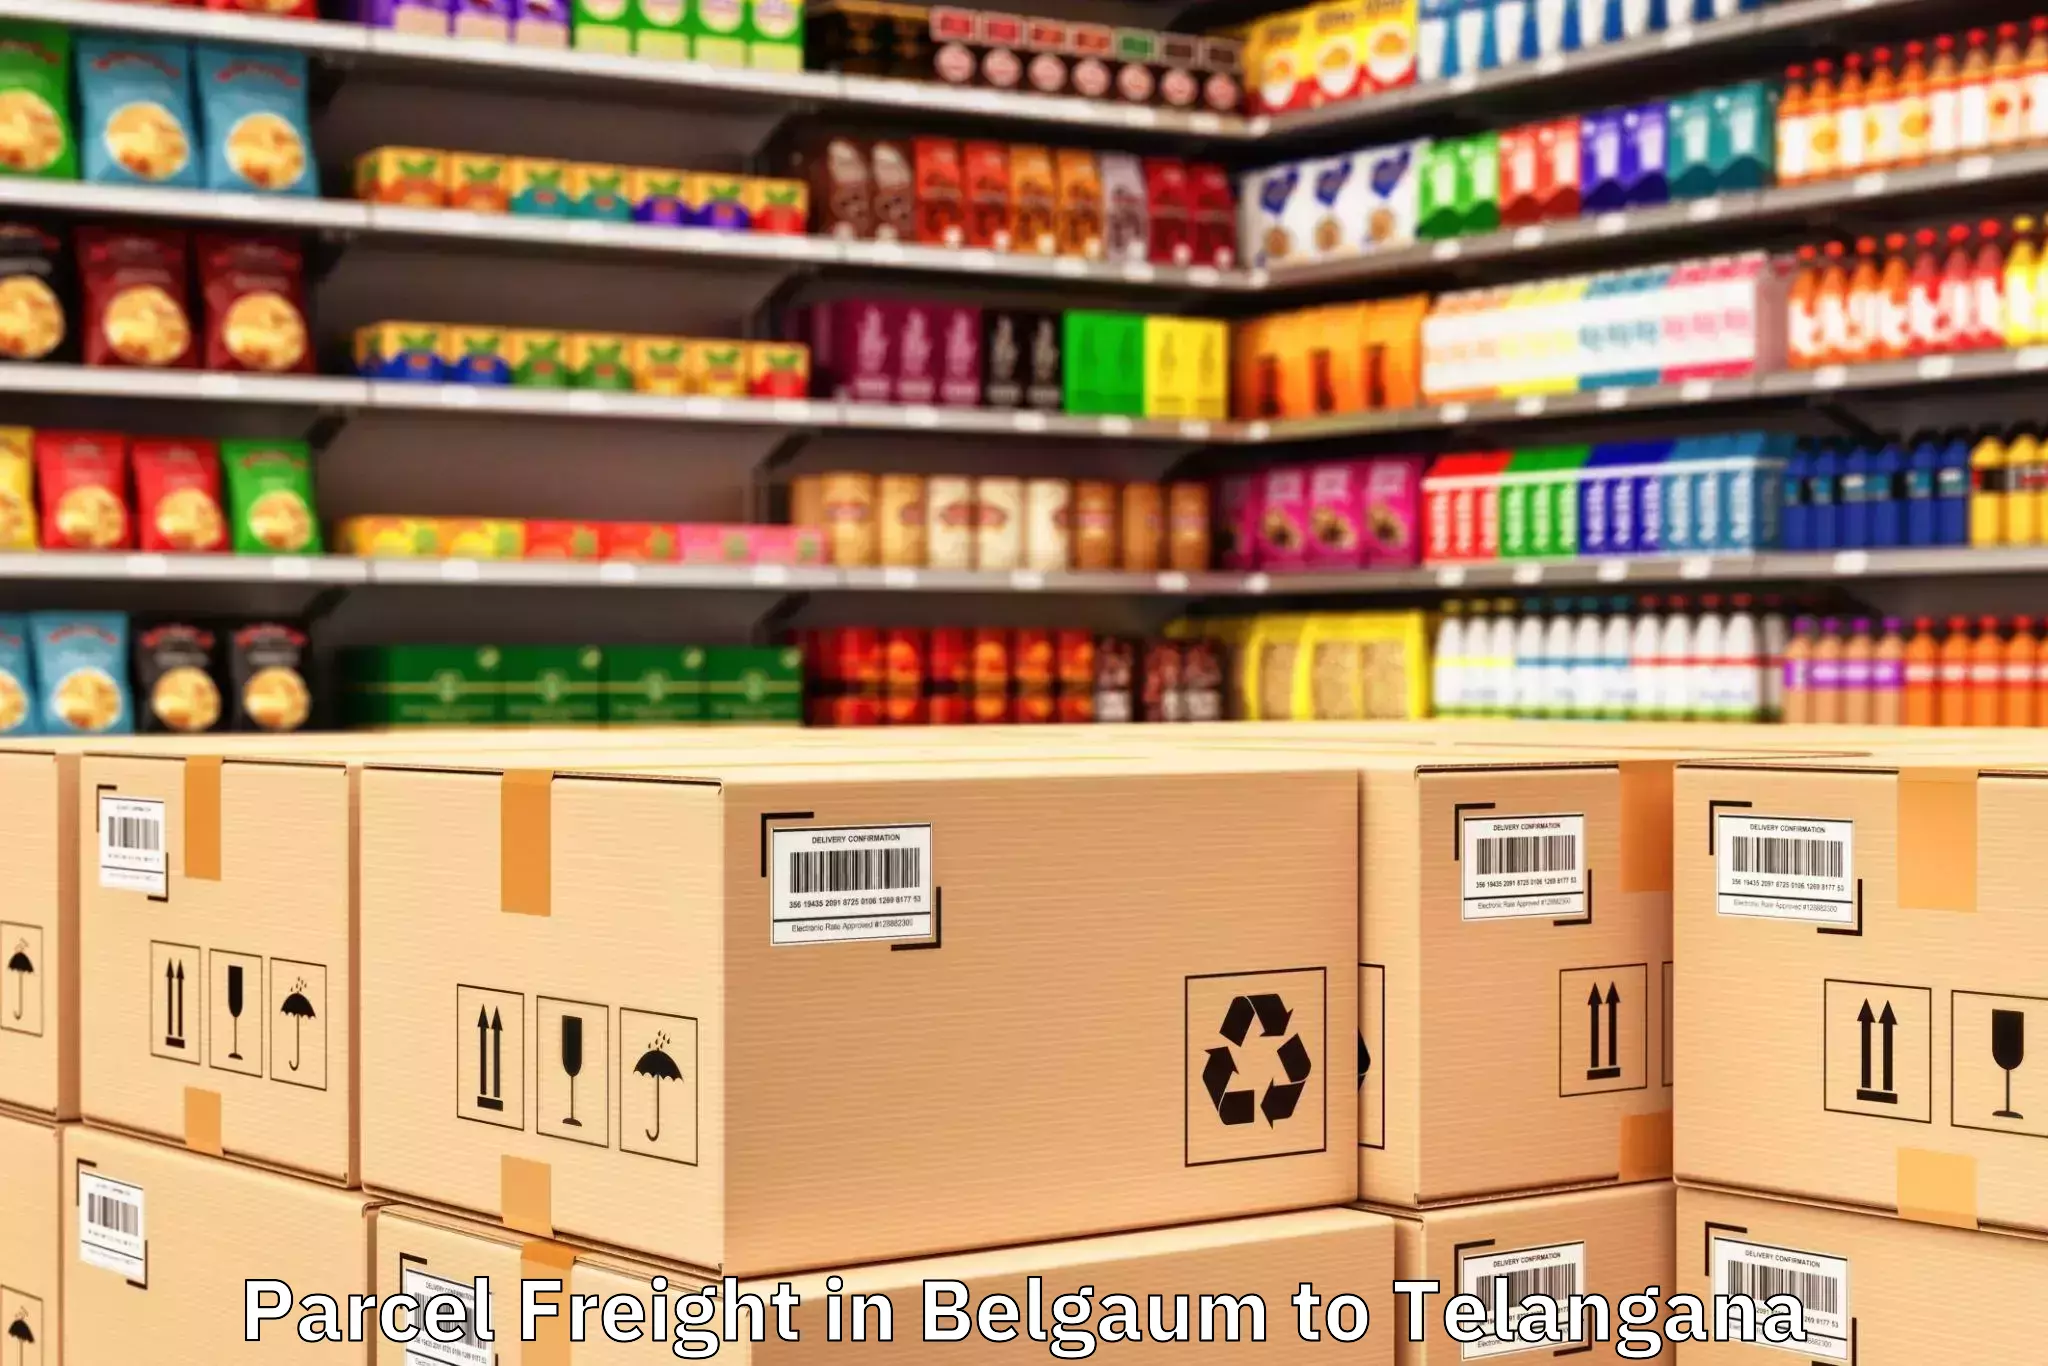 Quality Belgaum to Hyderabad Central Mall Parcel Freight